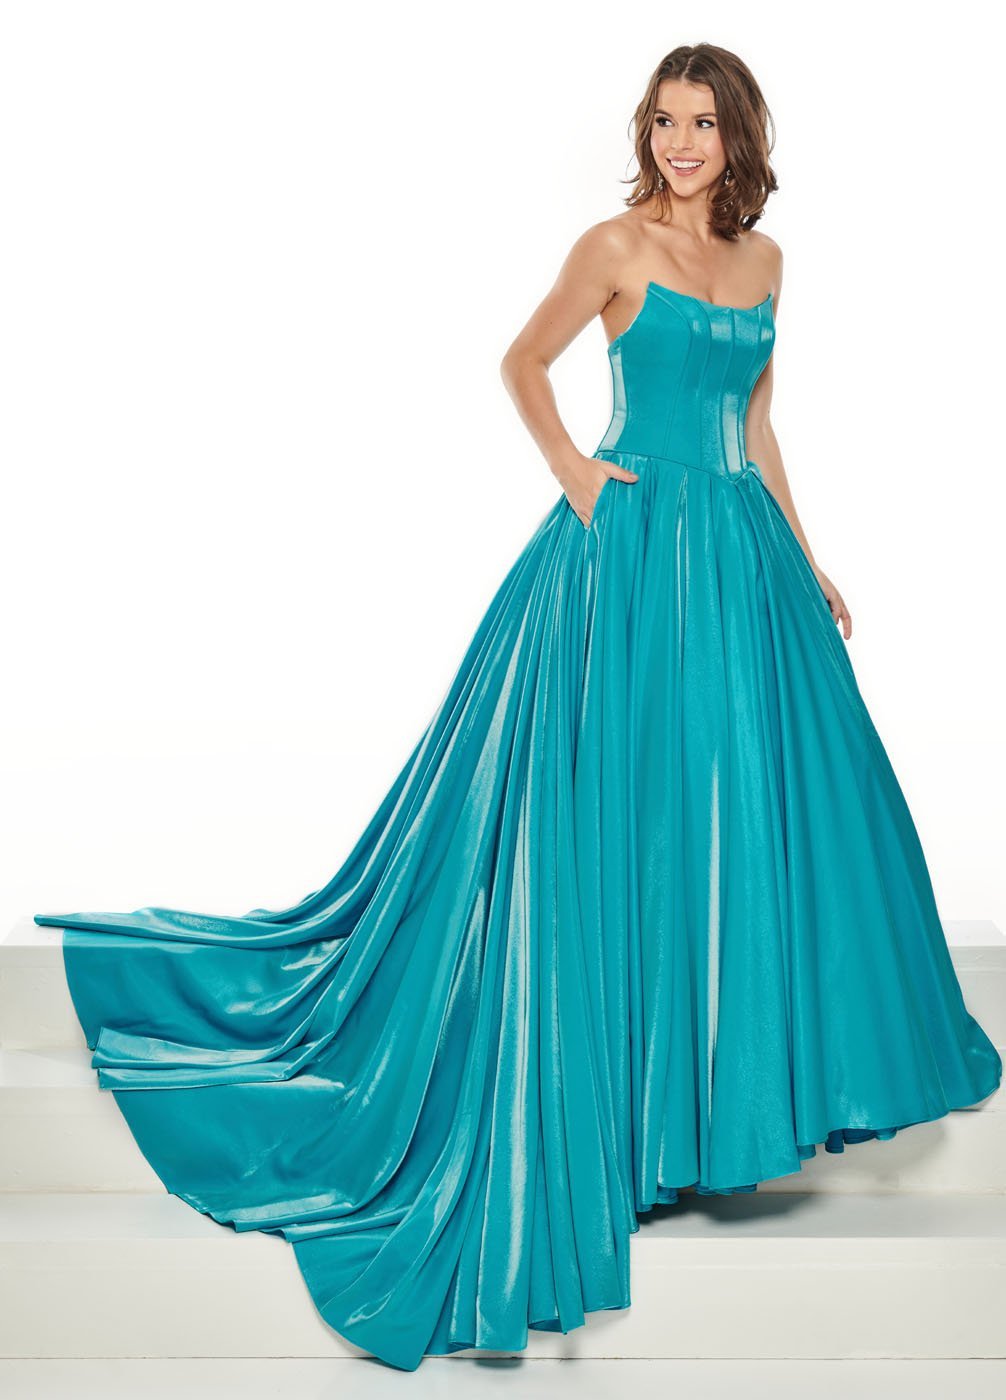 PrimaDonna by Rachel Allan 5098 dress images in these colors: Tangerine, Turquoise.